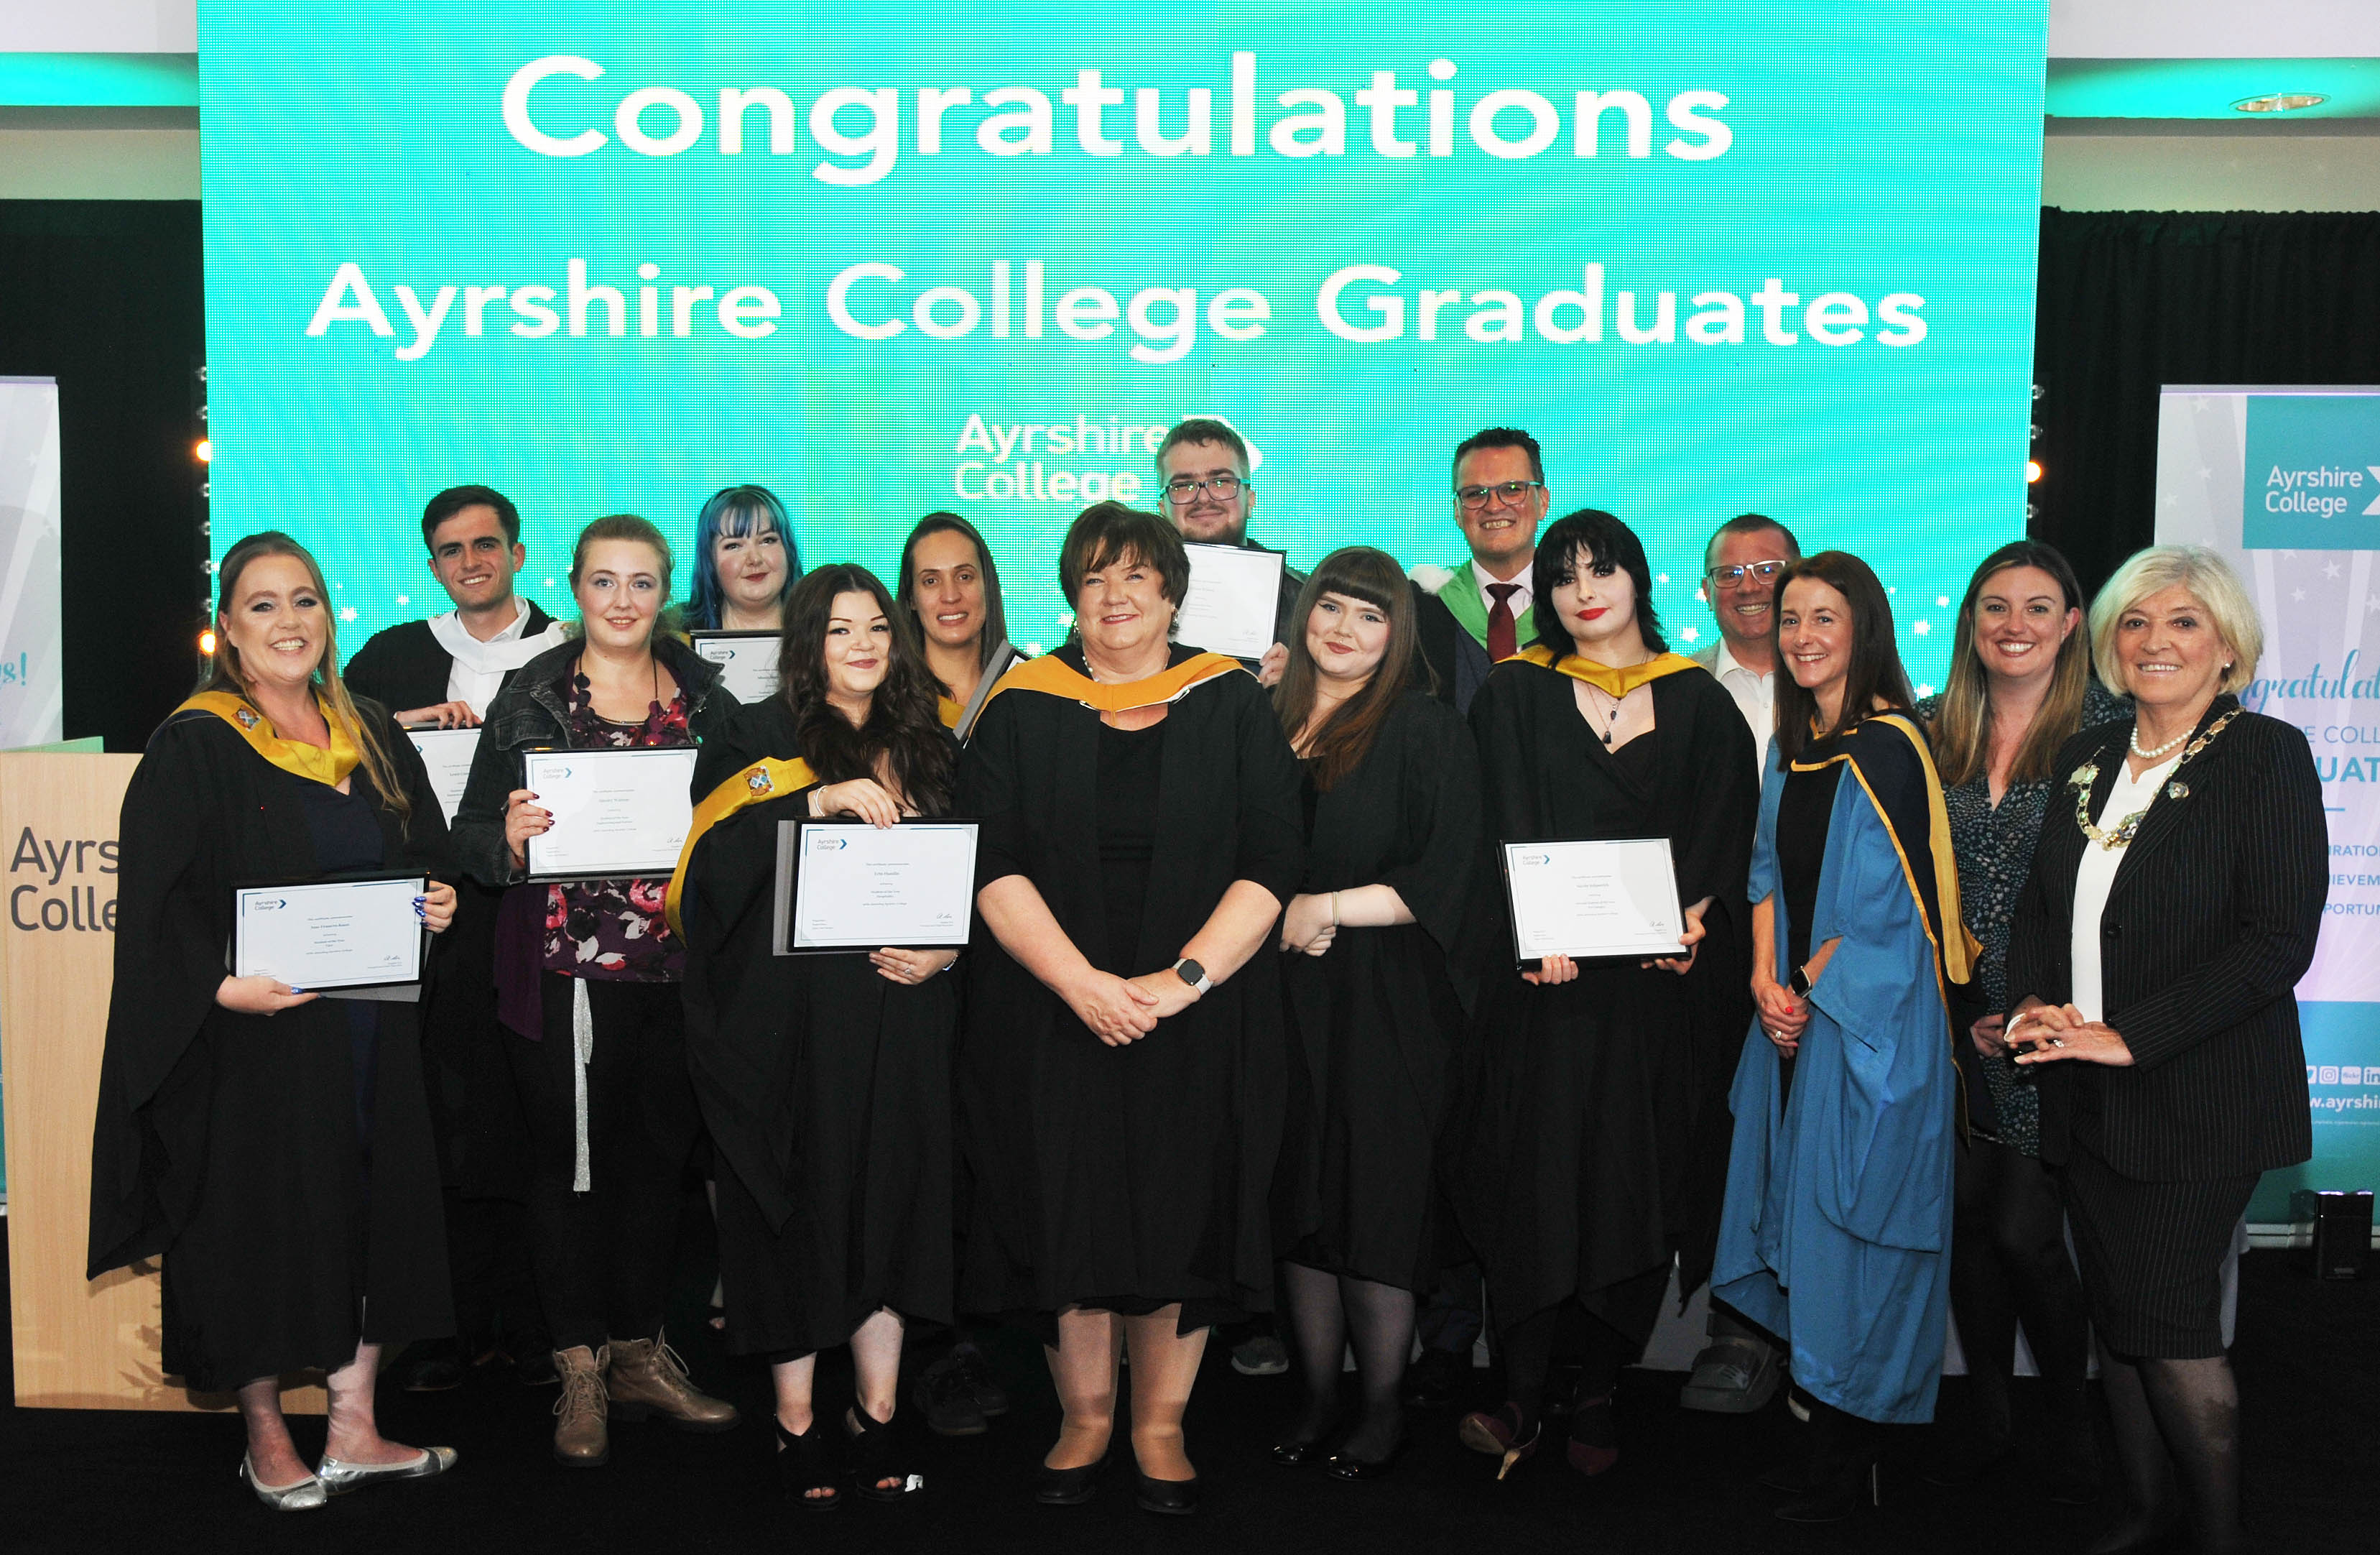 Ayrshire College students graduate at Ayr ceremony